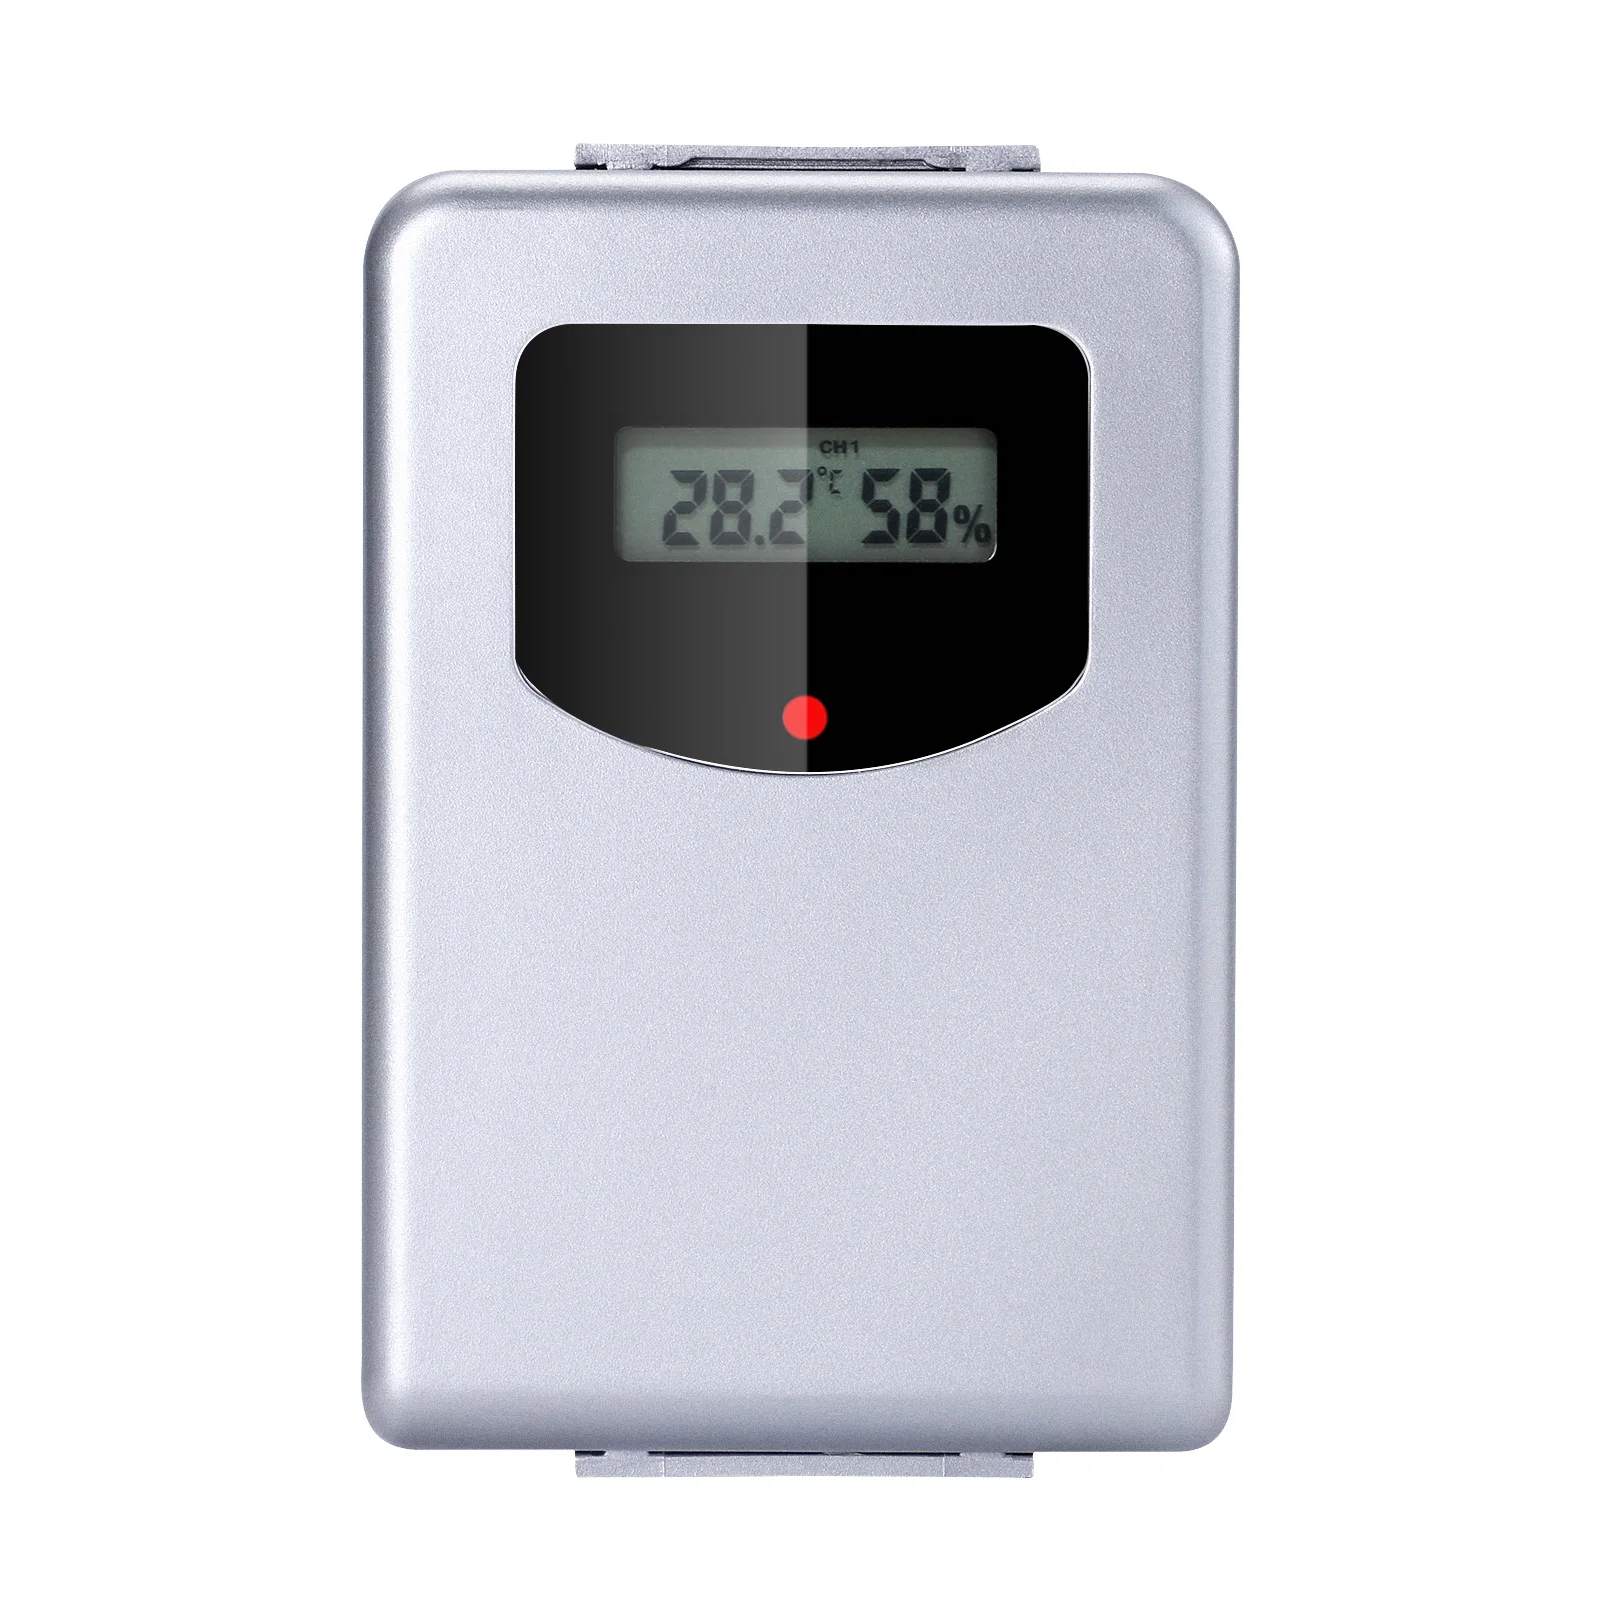 

433MHz Wireless Weather Station with Forecast Temperature Digital Thermometer Hygrometer Humidity Sensor